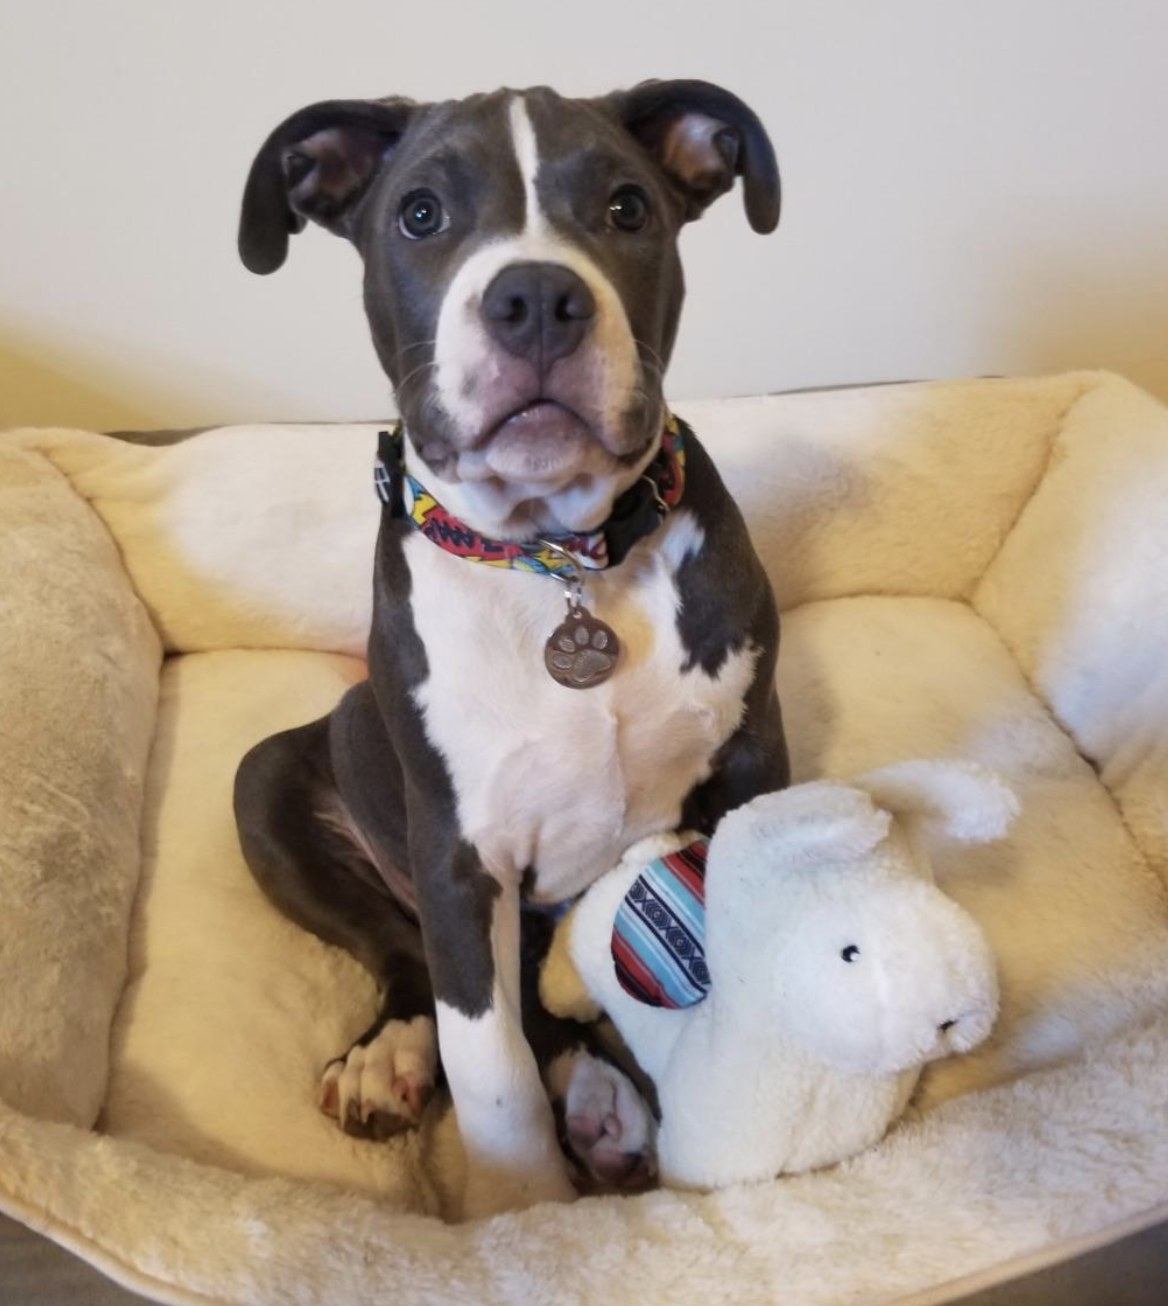 a grey and white puppy sitting in their bed with an ivory llama stuffed toy next to them